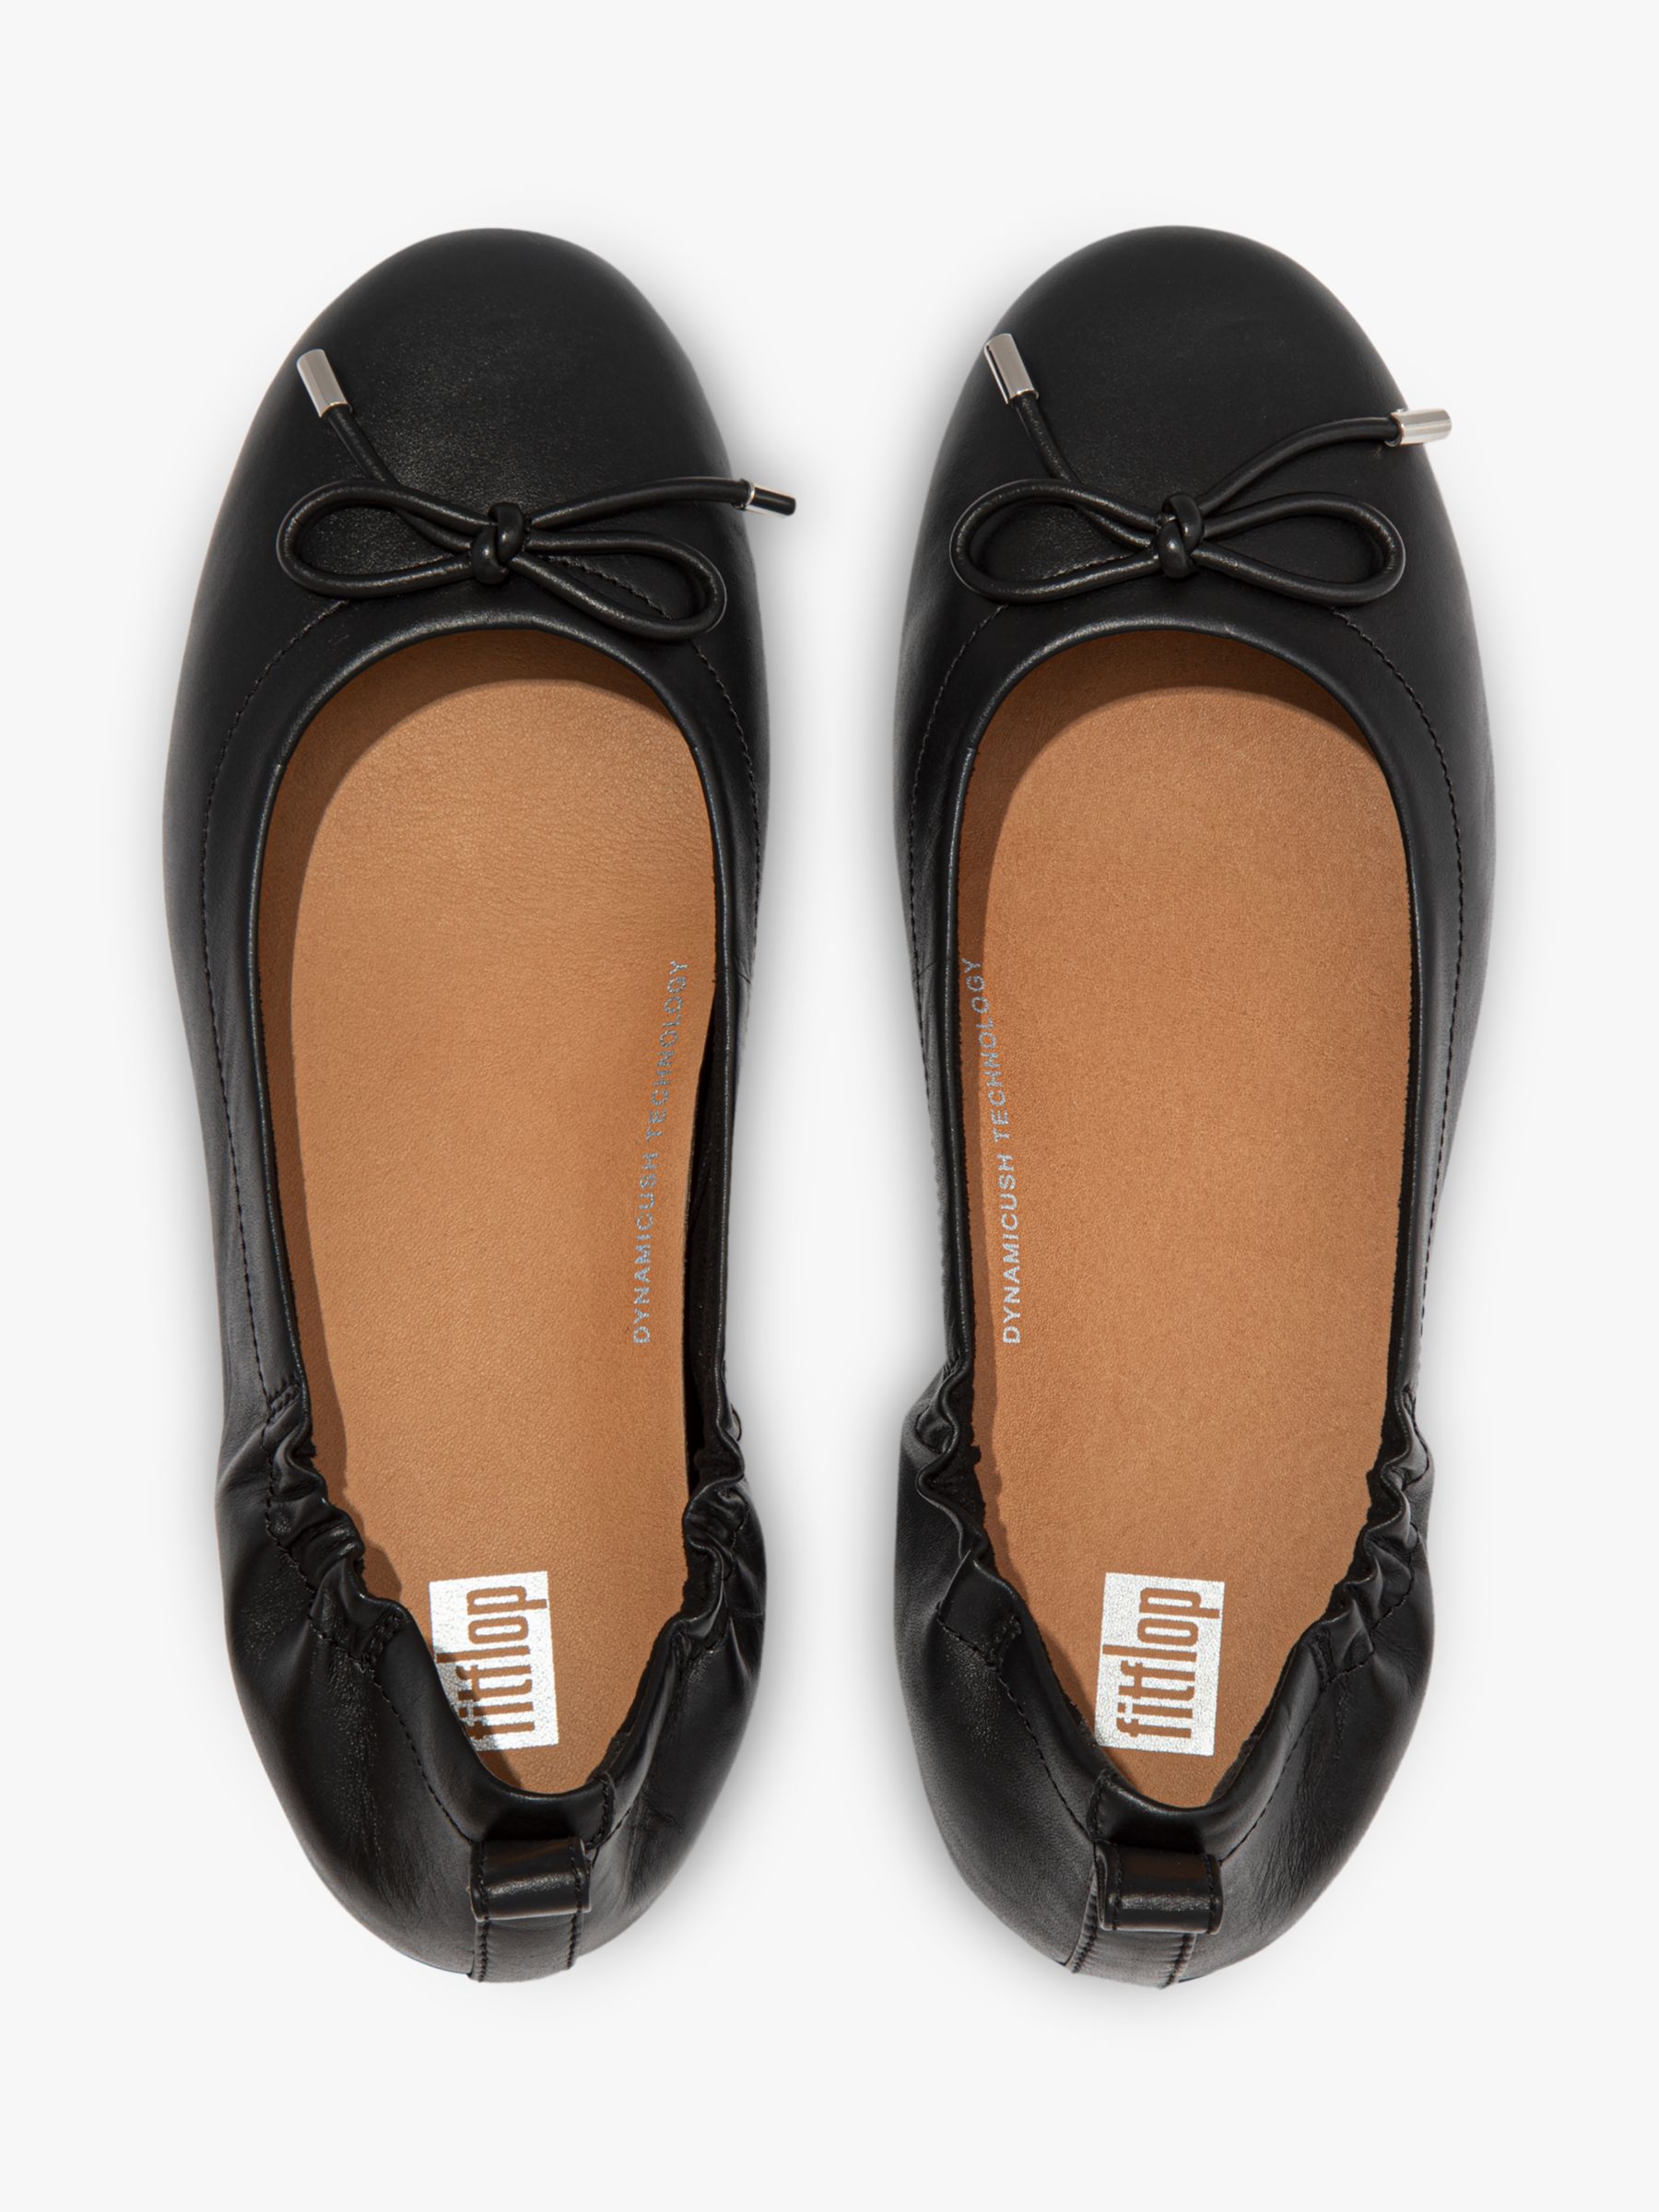 FitFlop Allegro Bow Leather Pumps, Black at John Lewis & Partners